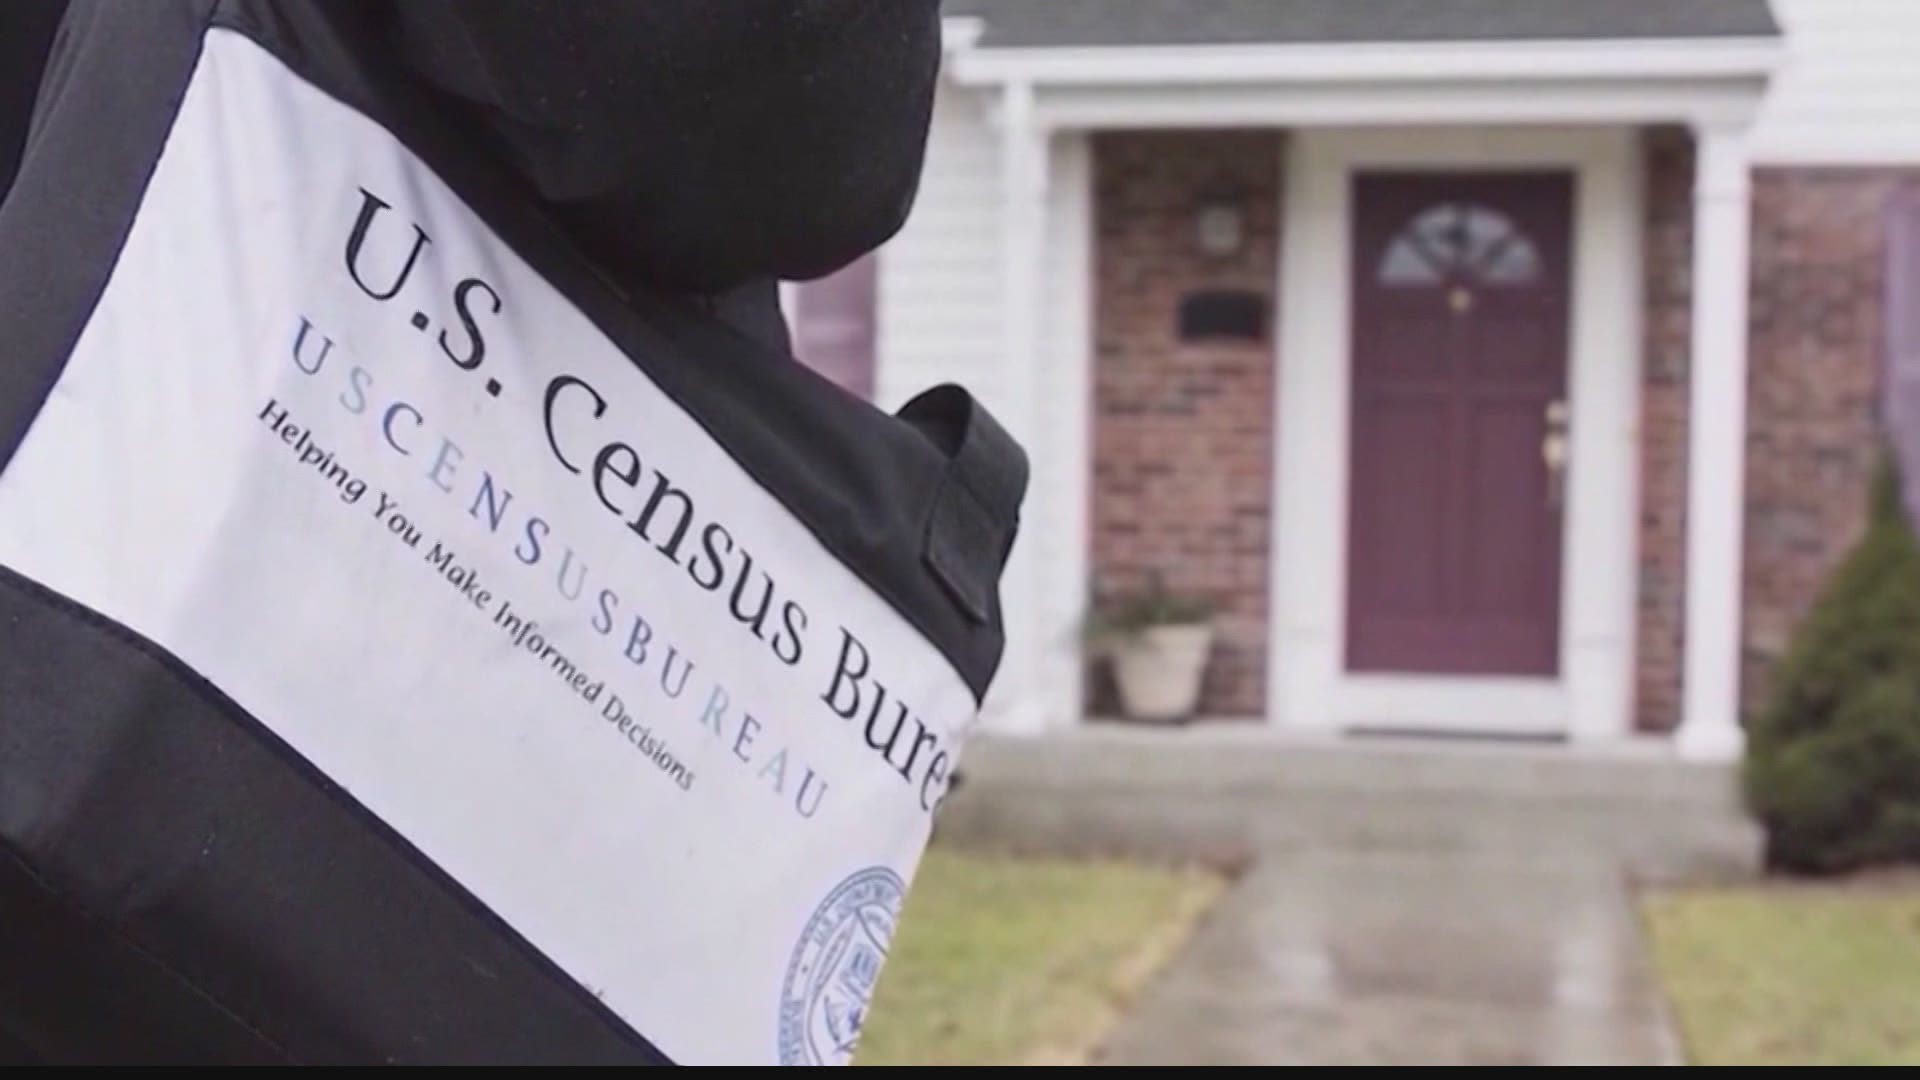 Oct. 15 is the last day to complete your census form.